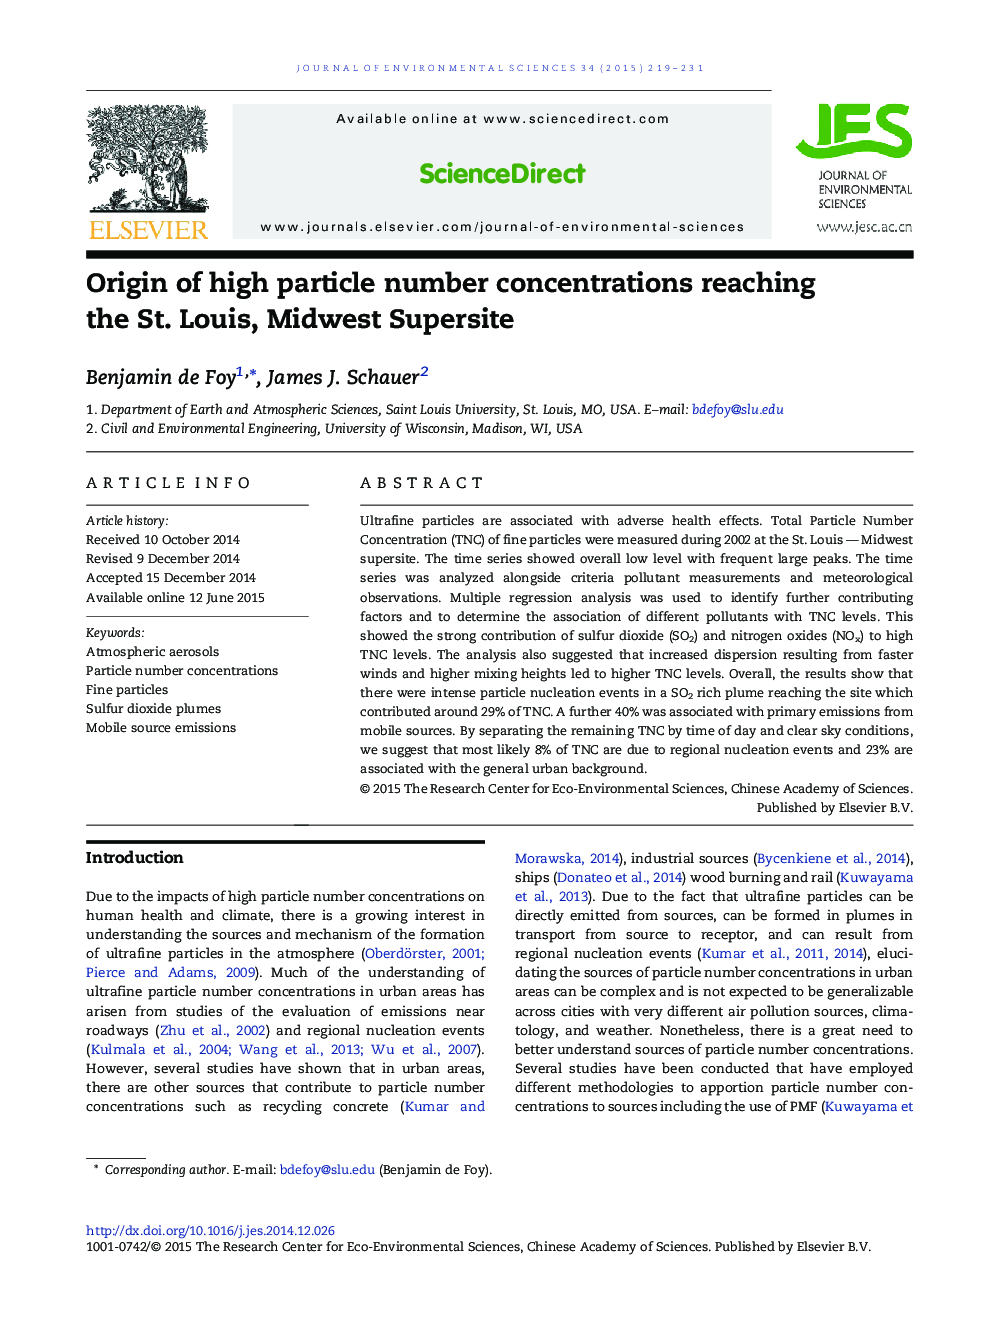 Origin of high particle number concentrations reaching the St. Louis, Midwest Supersite